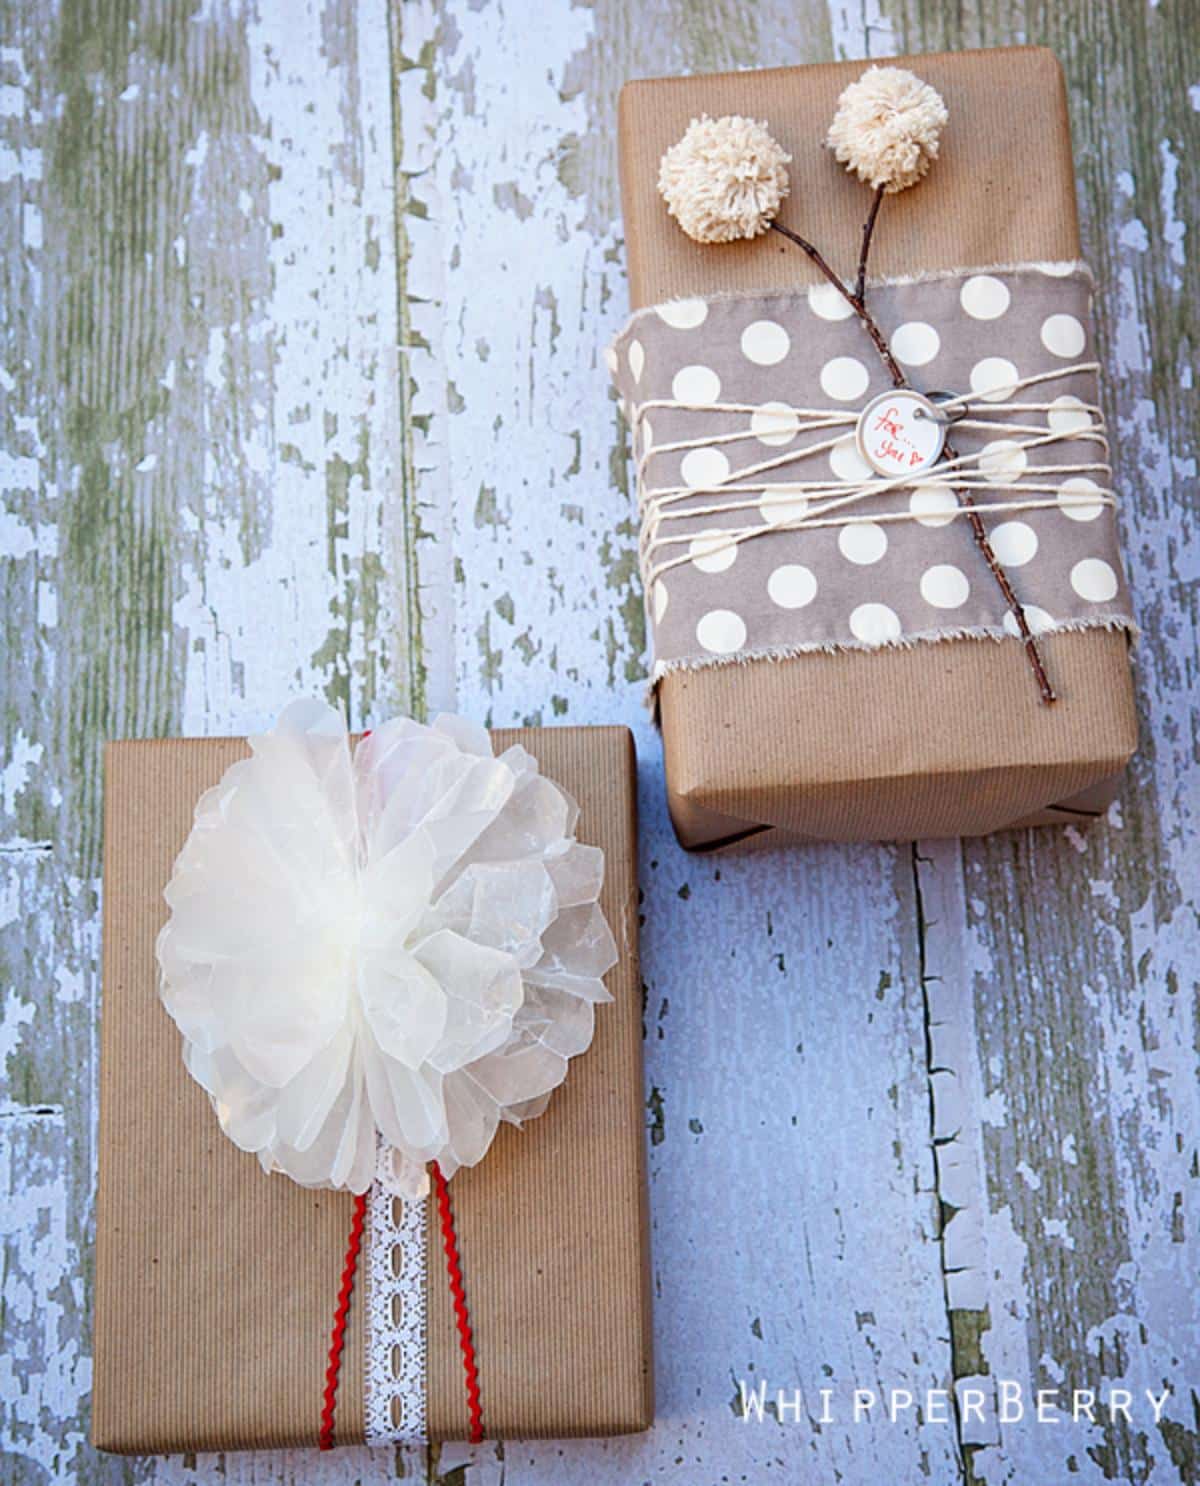 DIY tissue paper flower bow gift wrappings.